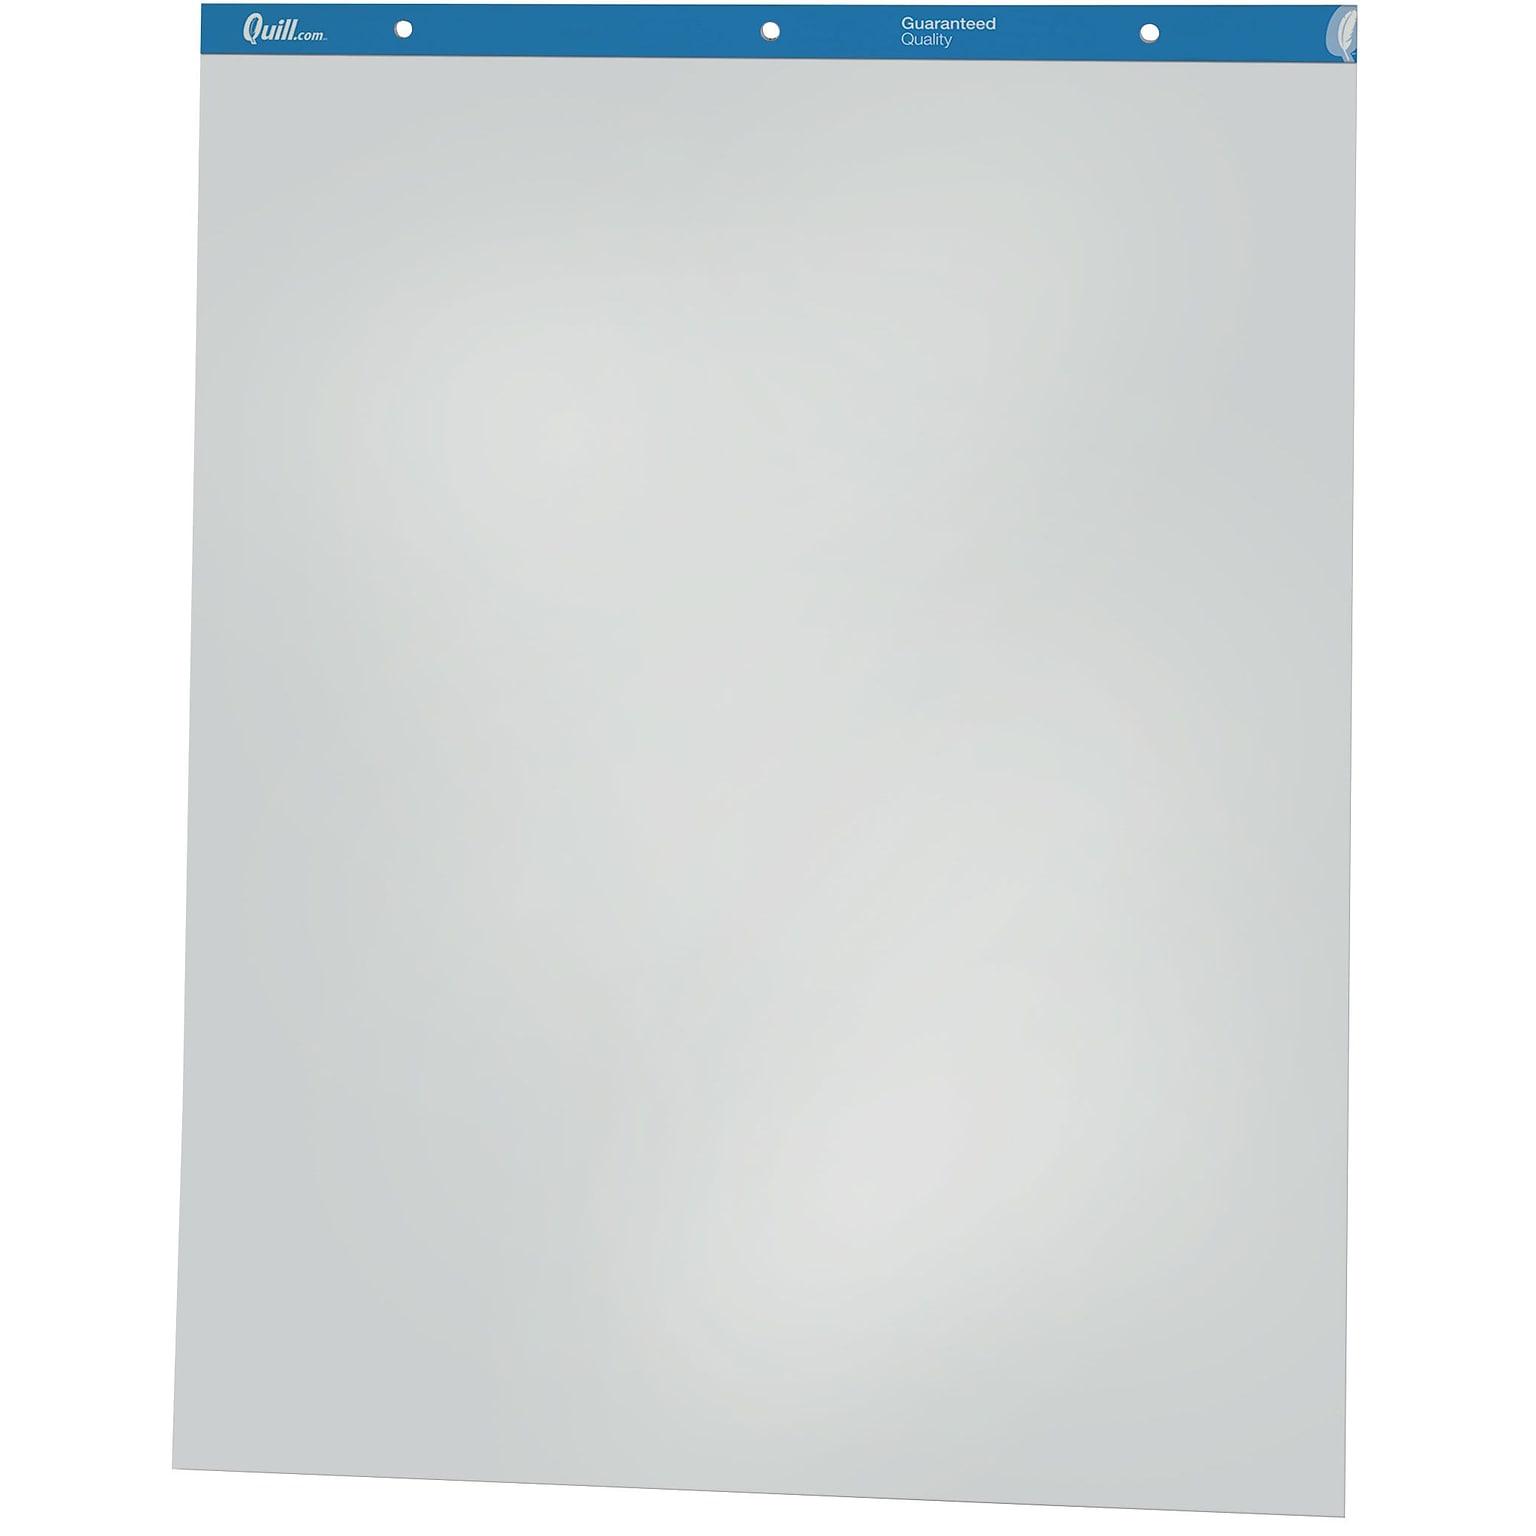 Quill Brand® Plain Easel Pad, 27 x 34, White, 50 Sheets/Pad, 2 Pads/Box (72044250)